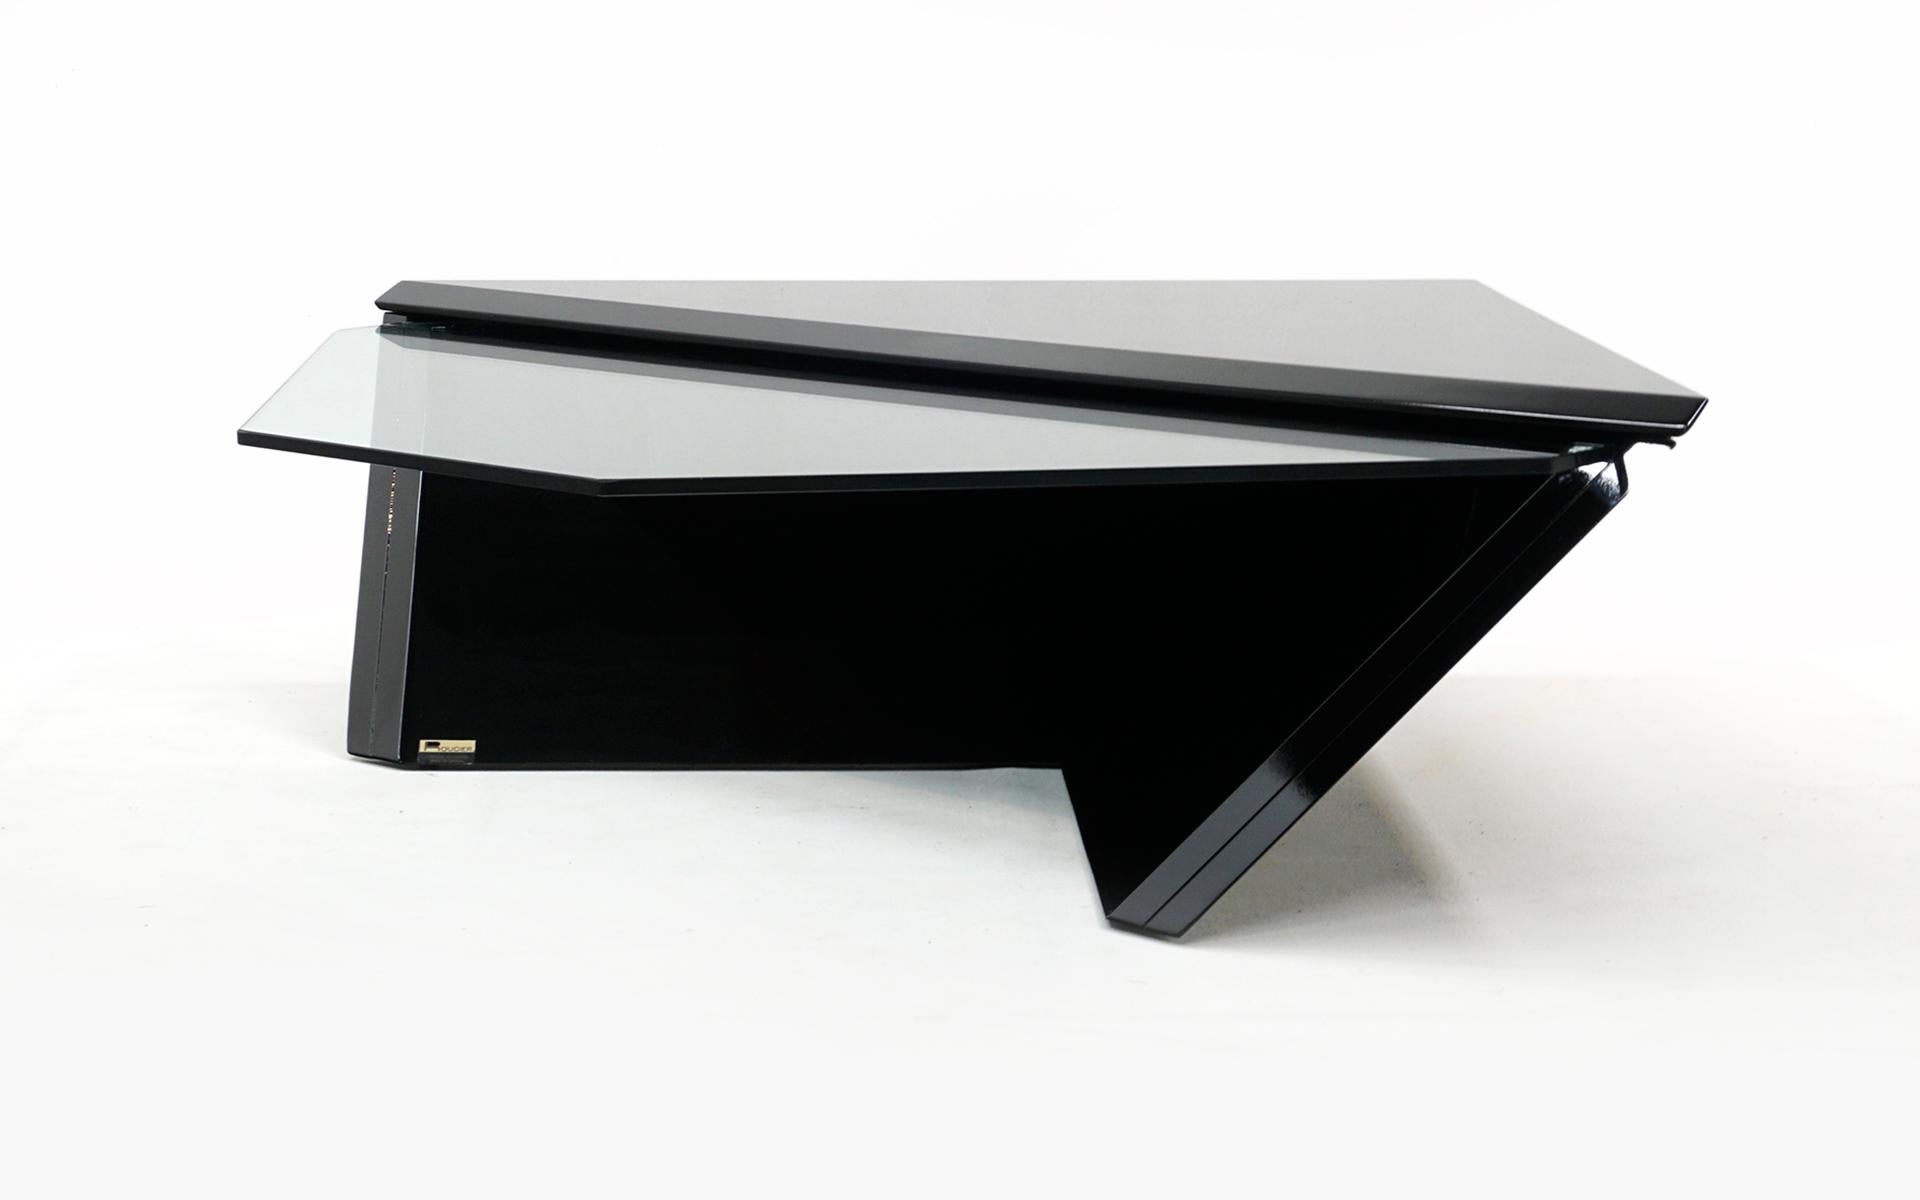 Gloss black and clear glass geometric, diamond shape coffee table designed and made by Rougier, Canada, circa 1970. We have had this piece expertly restored and finished in the original gloss black. It is stunning in person. This unique design